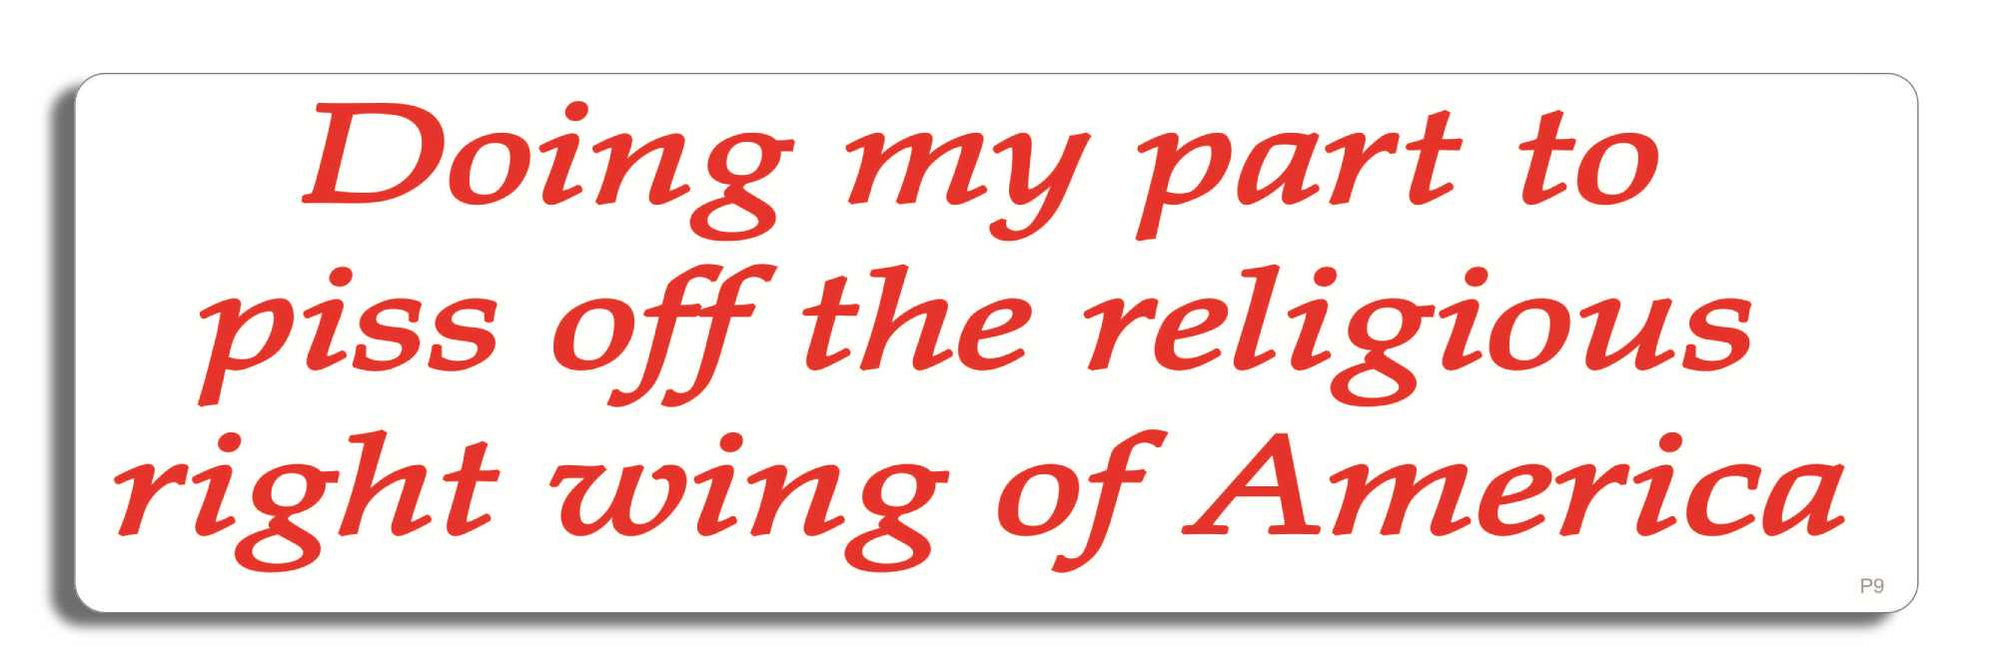 Doing my part to piss off the religious right wing of America - 3" x 10" Bumper Sticker--Car Magnet- -  Decal Bumper Sticker-political Bumper Sticker Car Magnet Doing my part to piss off the religious-  Decal for carsanti republican, democrat, liberal, political